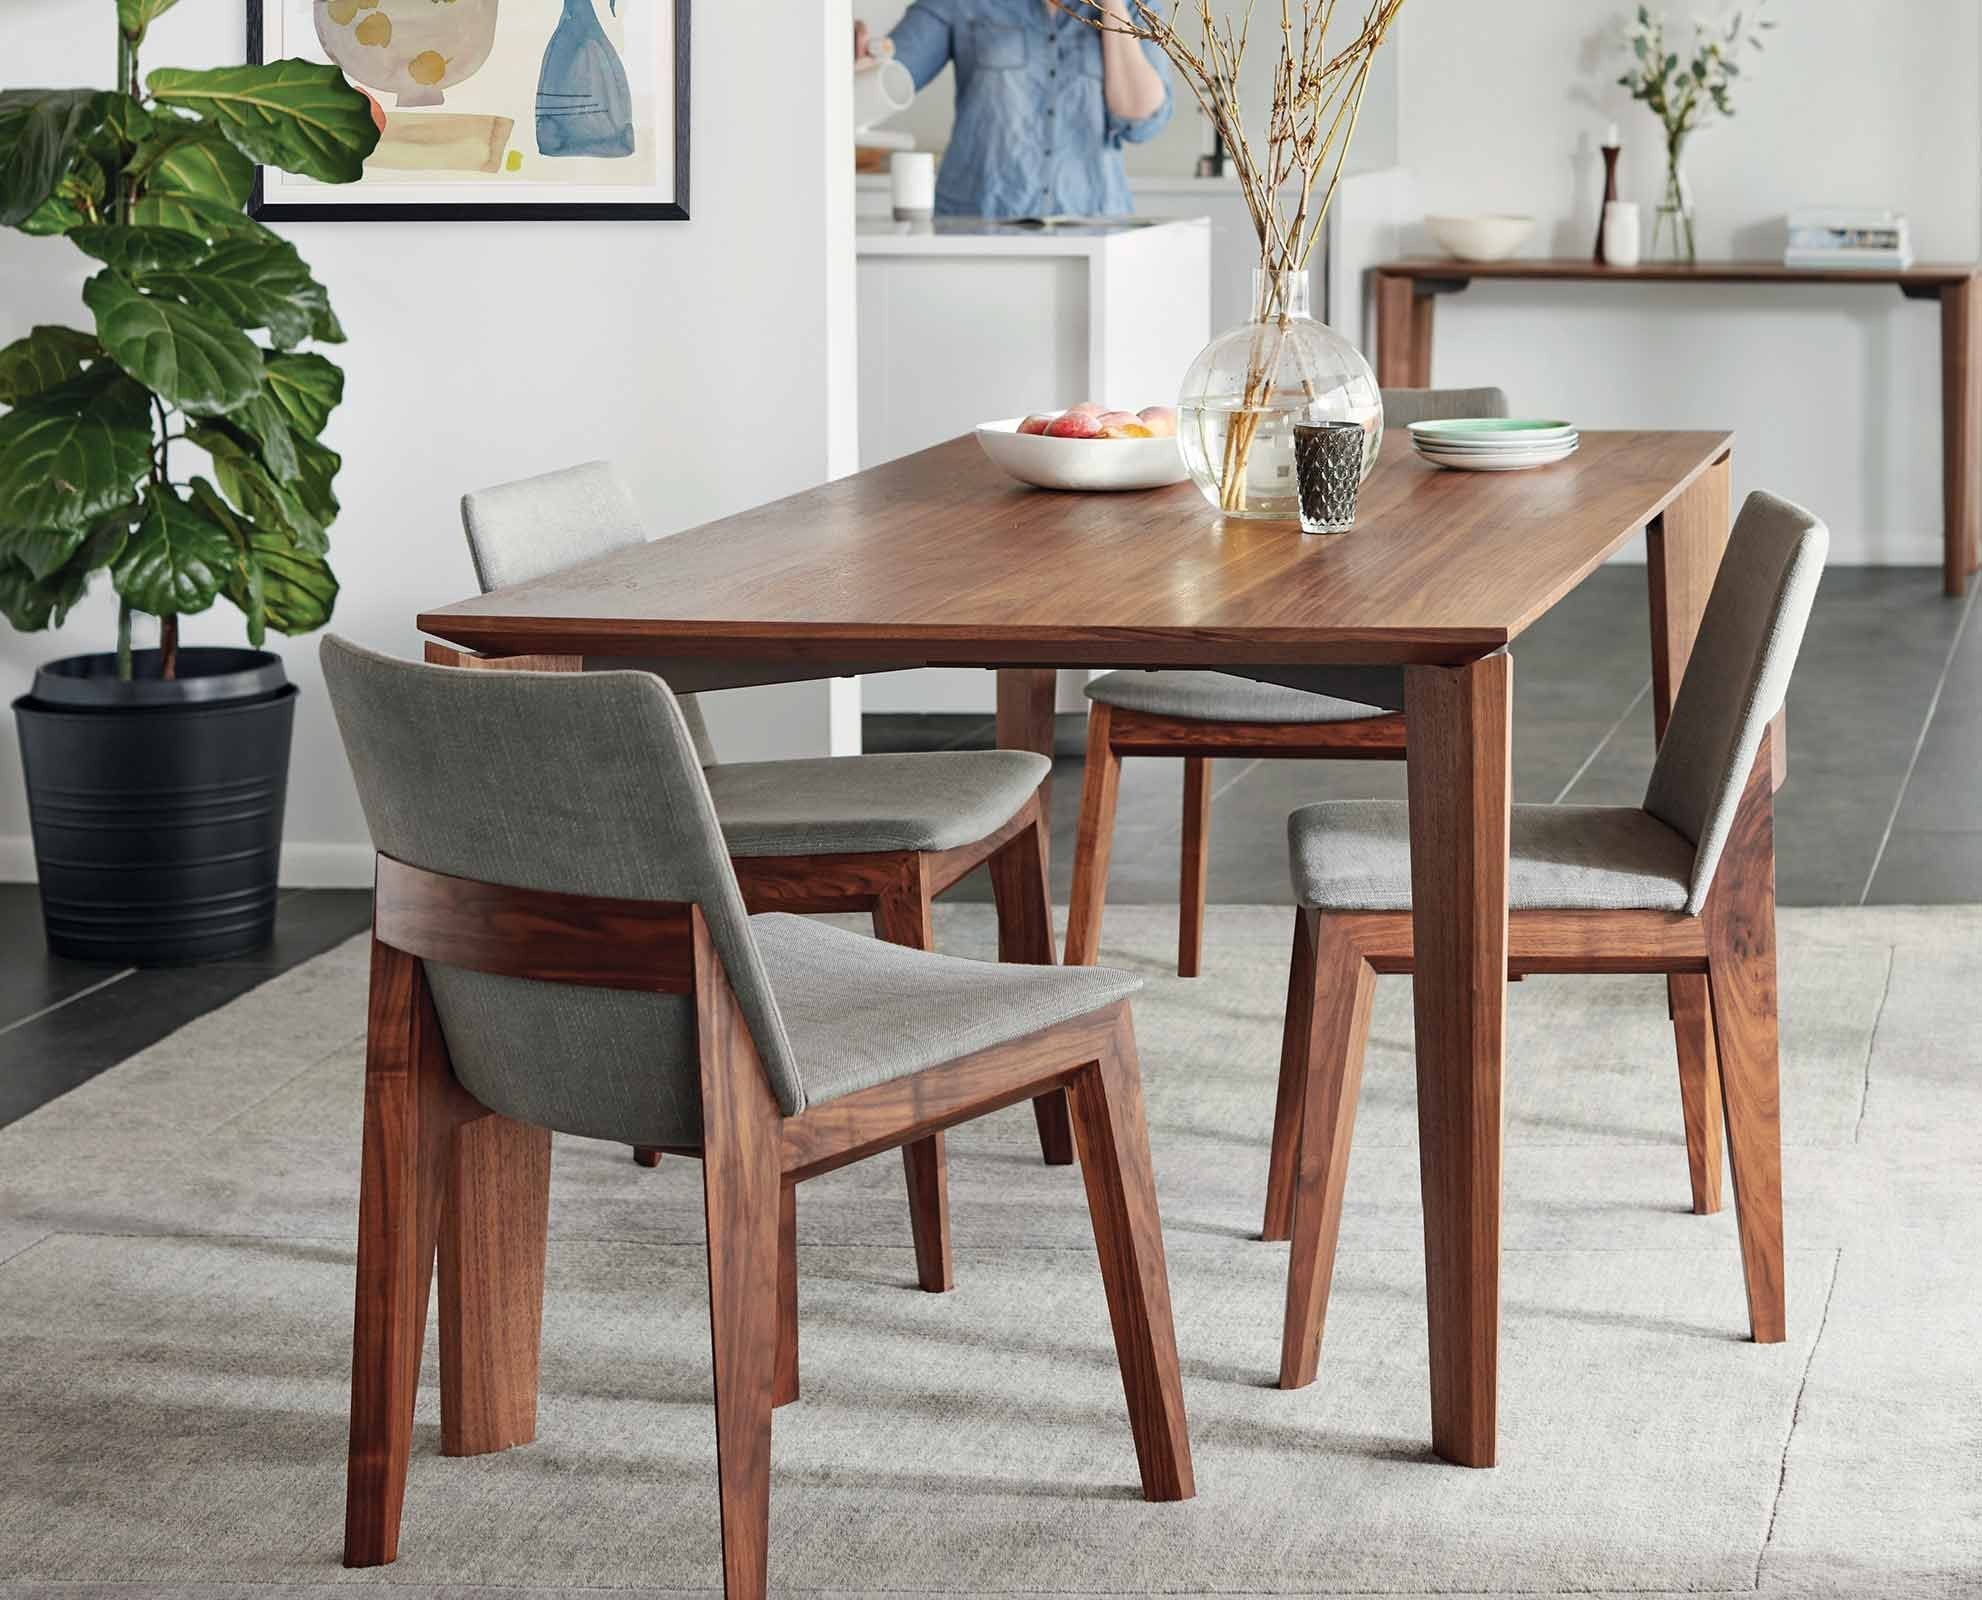 Mid-Century Modern Style for Dining Rooms - Scandinavian ...